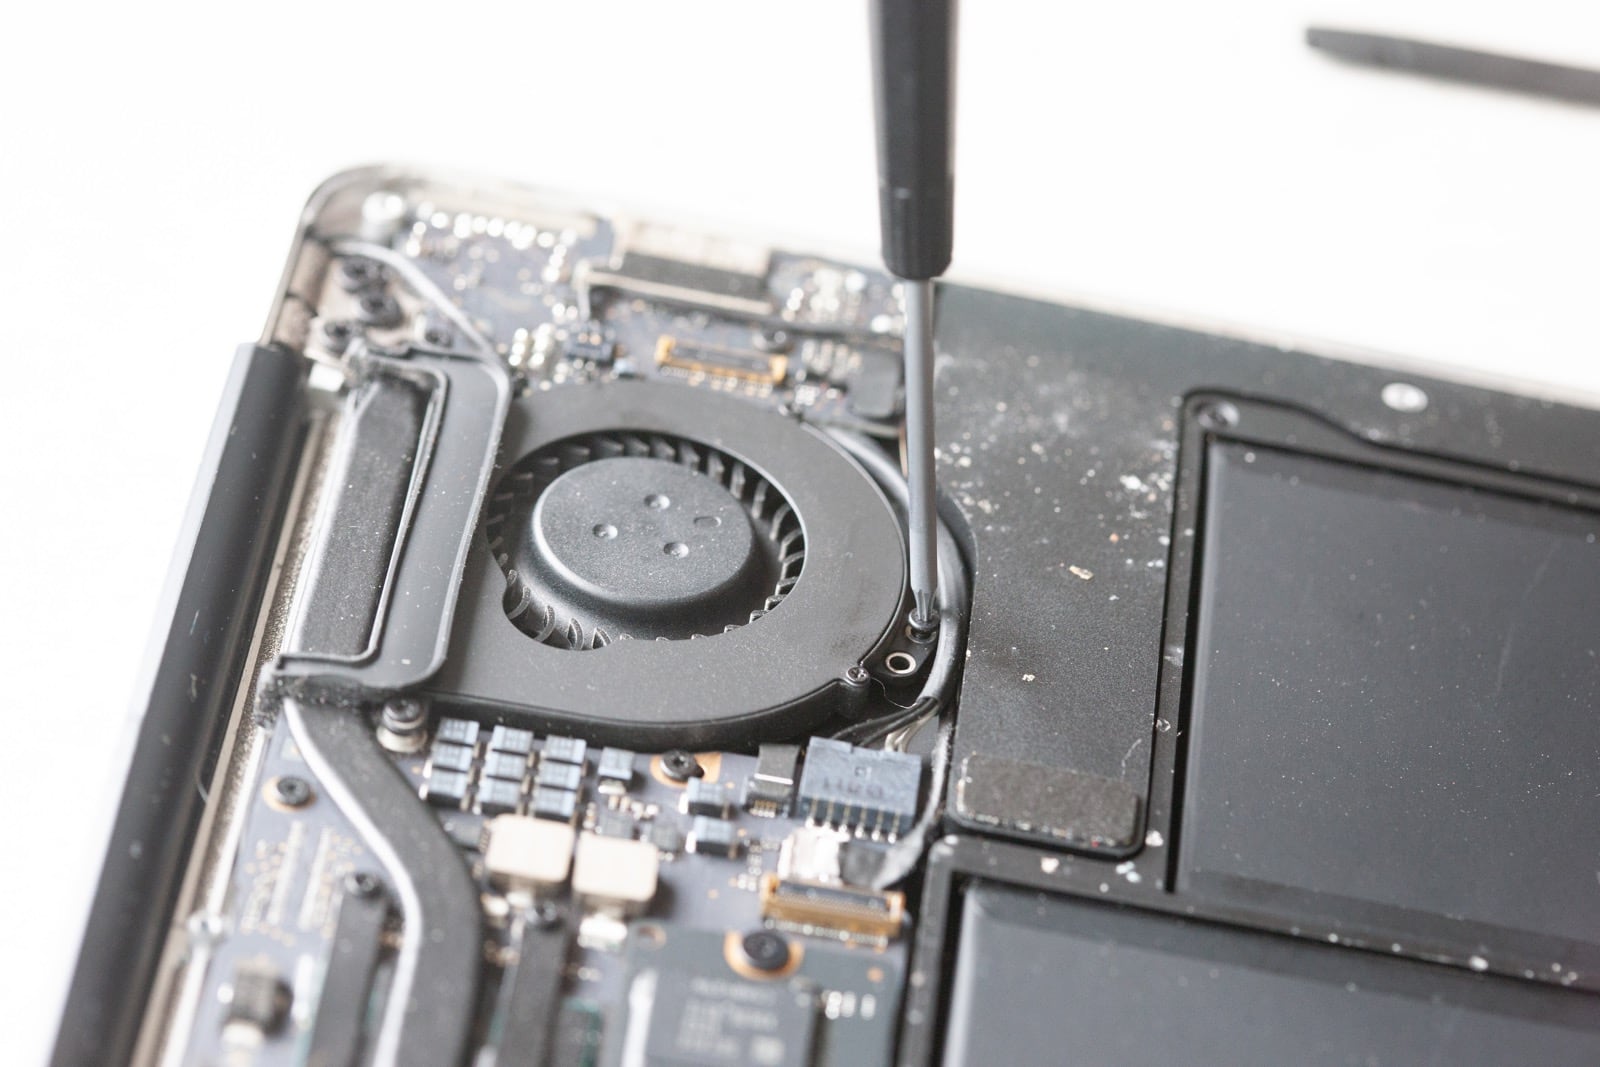 Removing bottom screw on MacBook Air fan assembly.